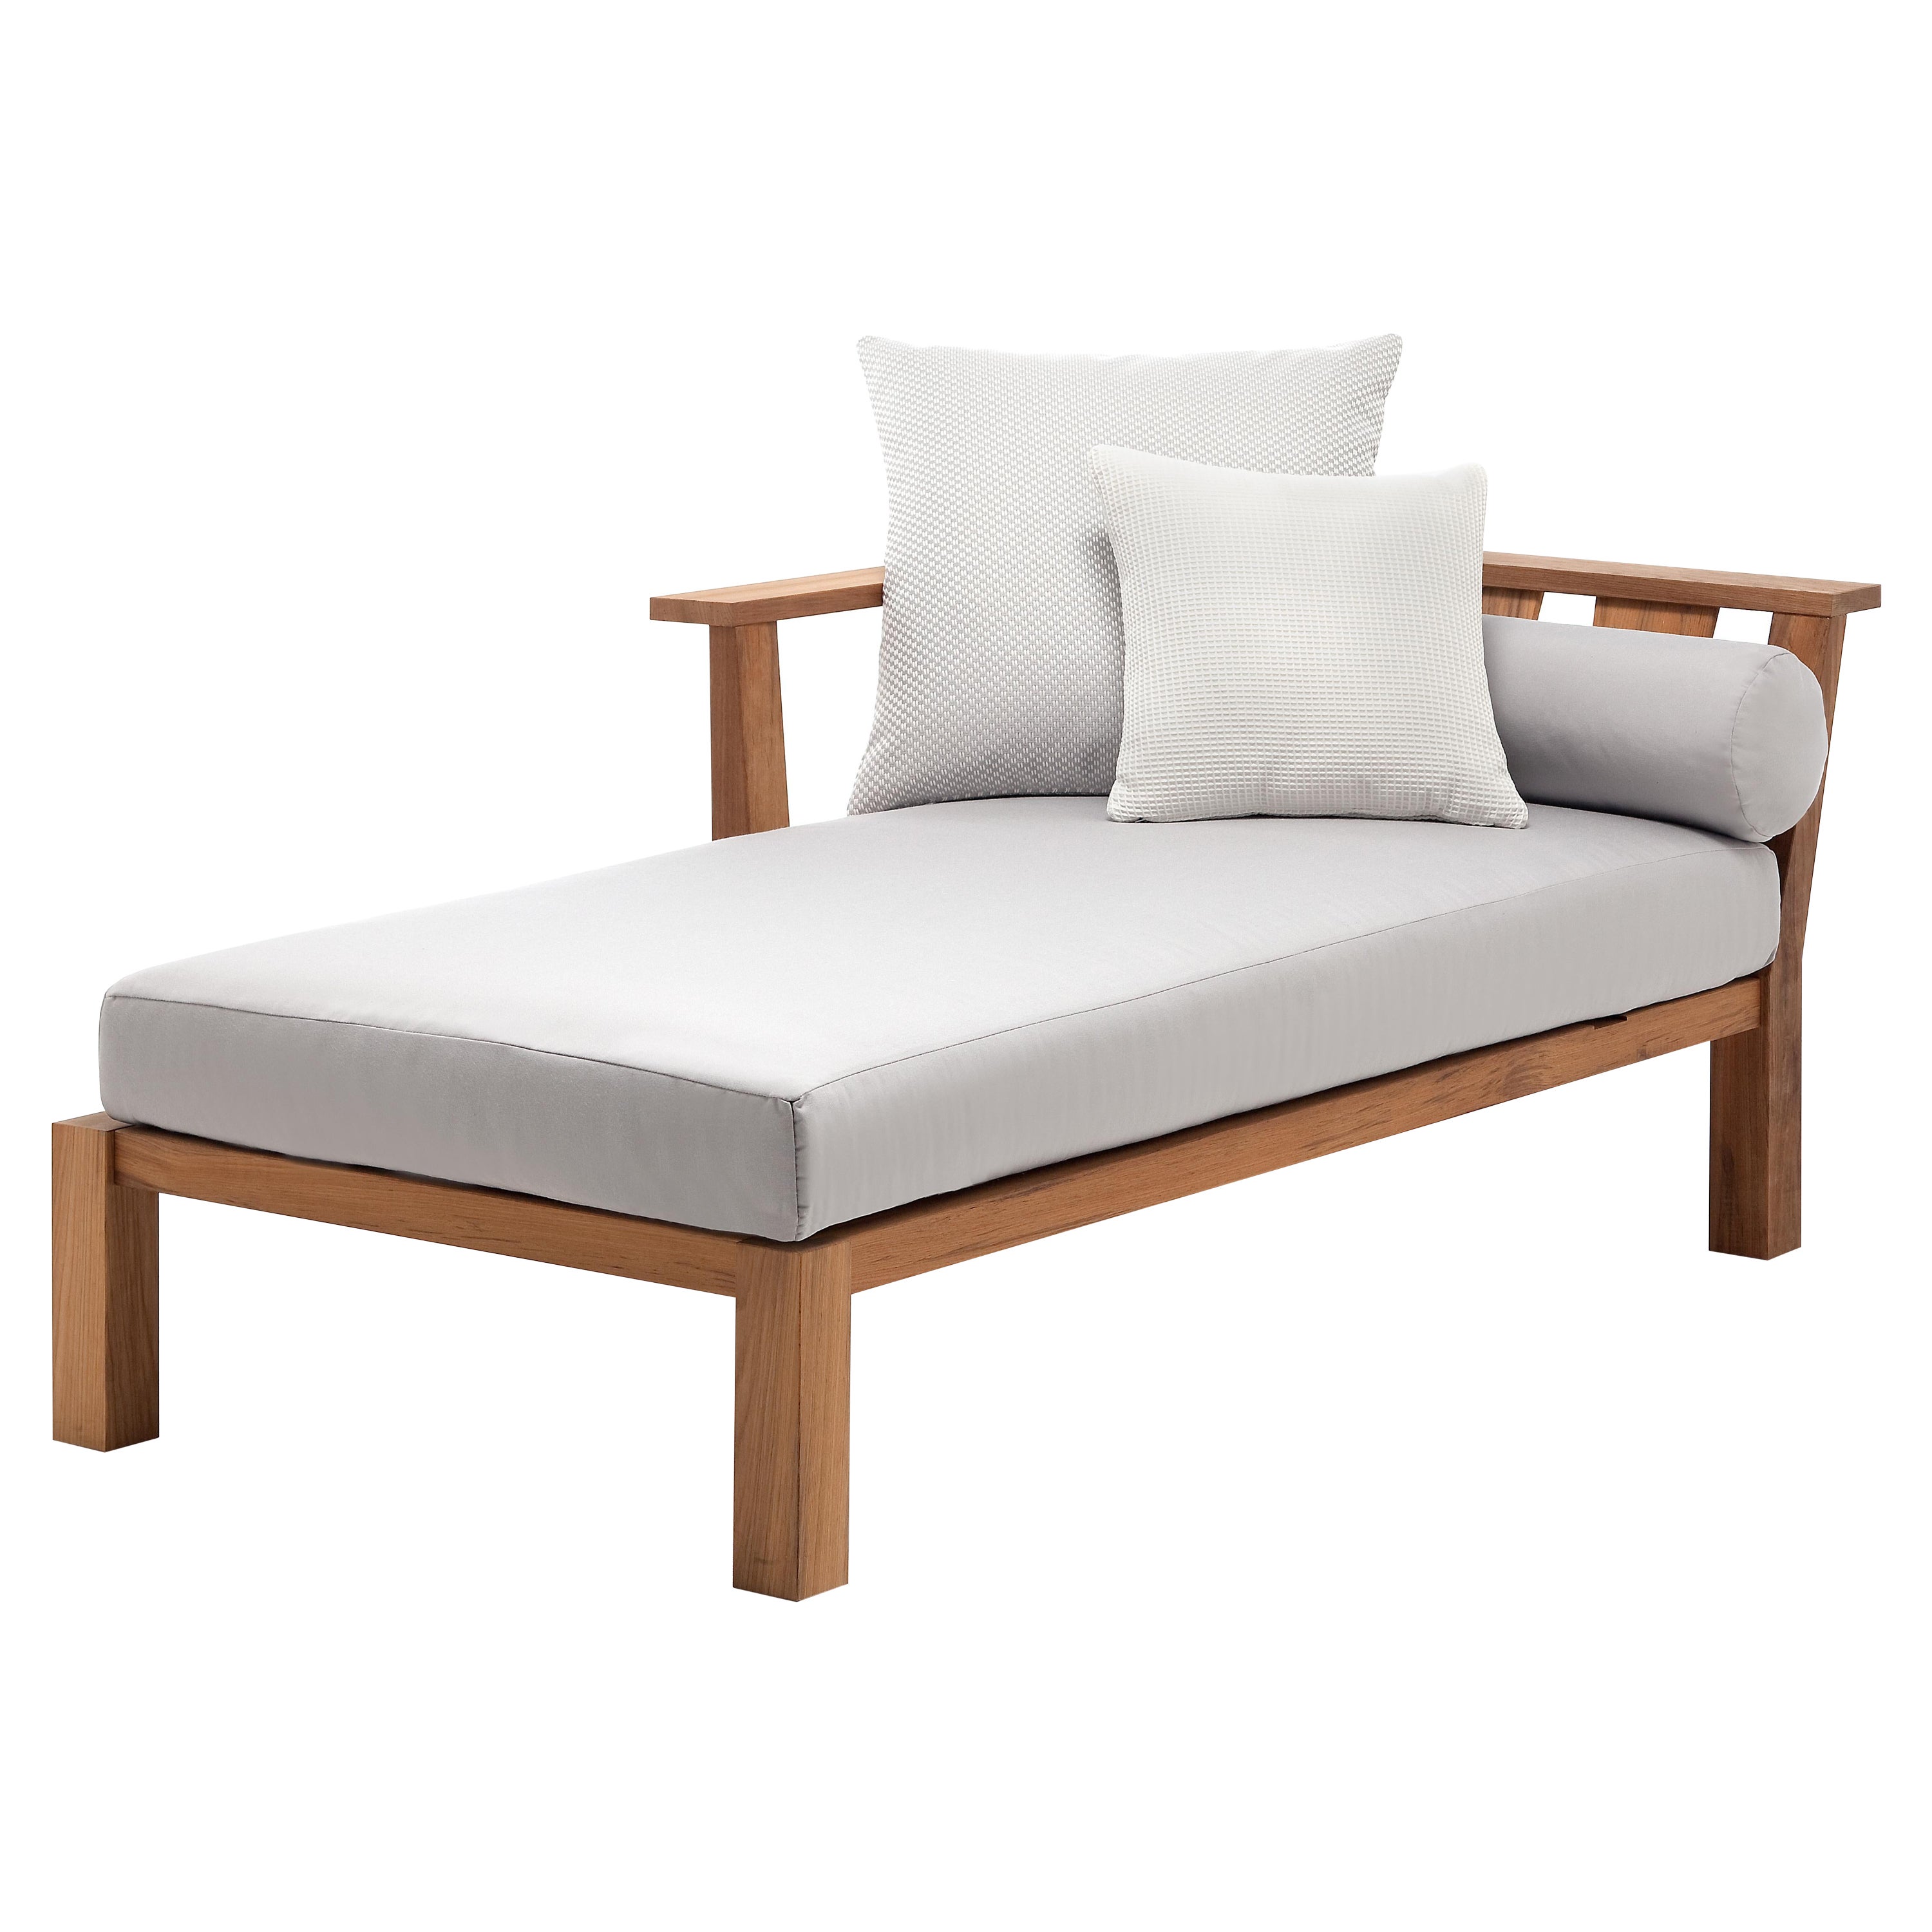 Gervasoni Inout Modular Day Bed in London 07 Upholstery with Natural Teak Frame For Sale